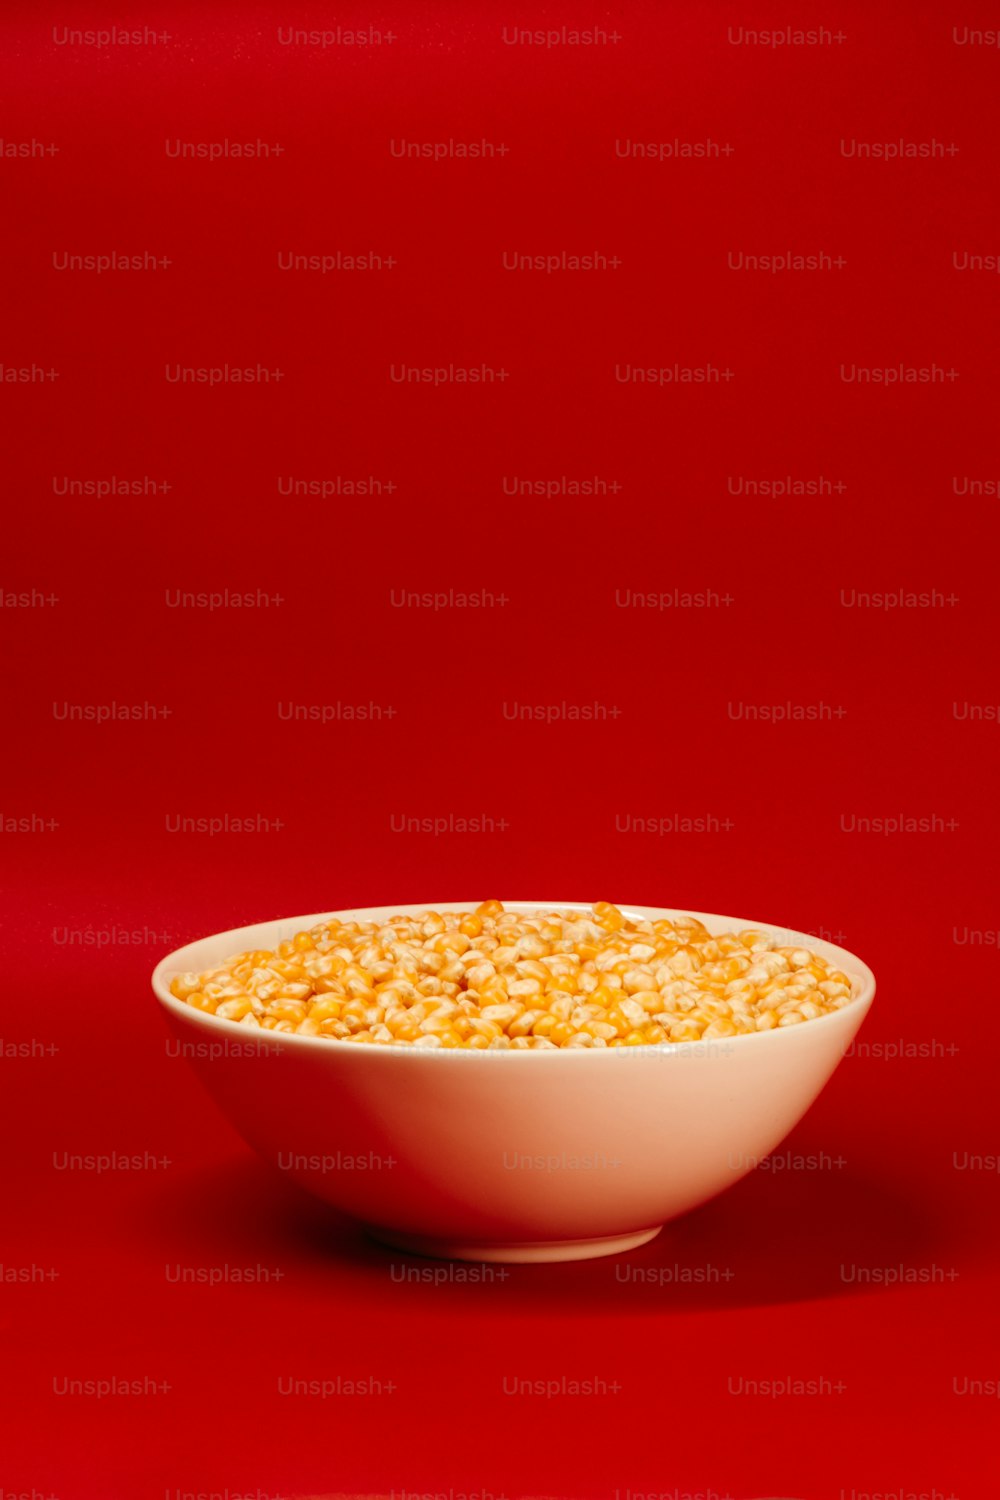 a bowl of corn on a red background